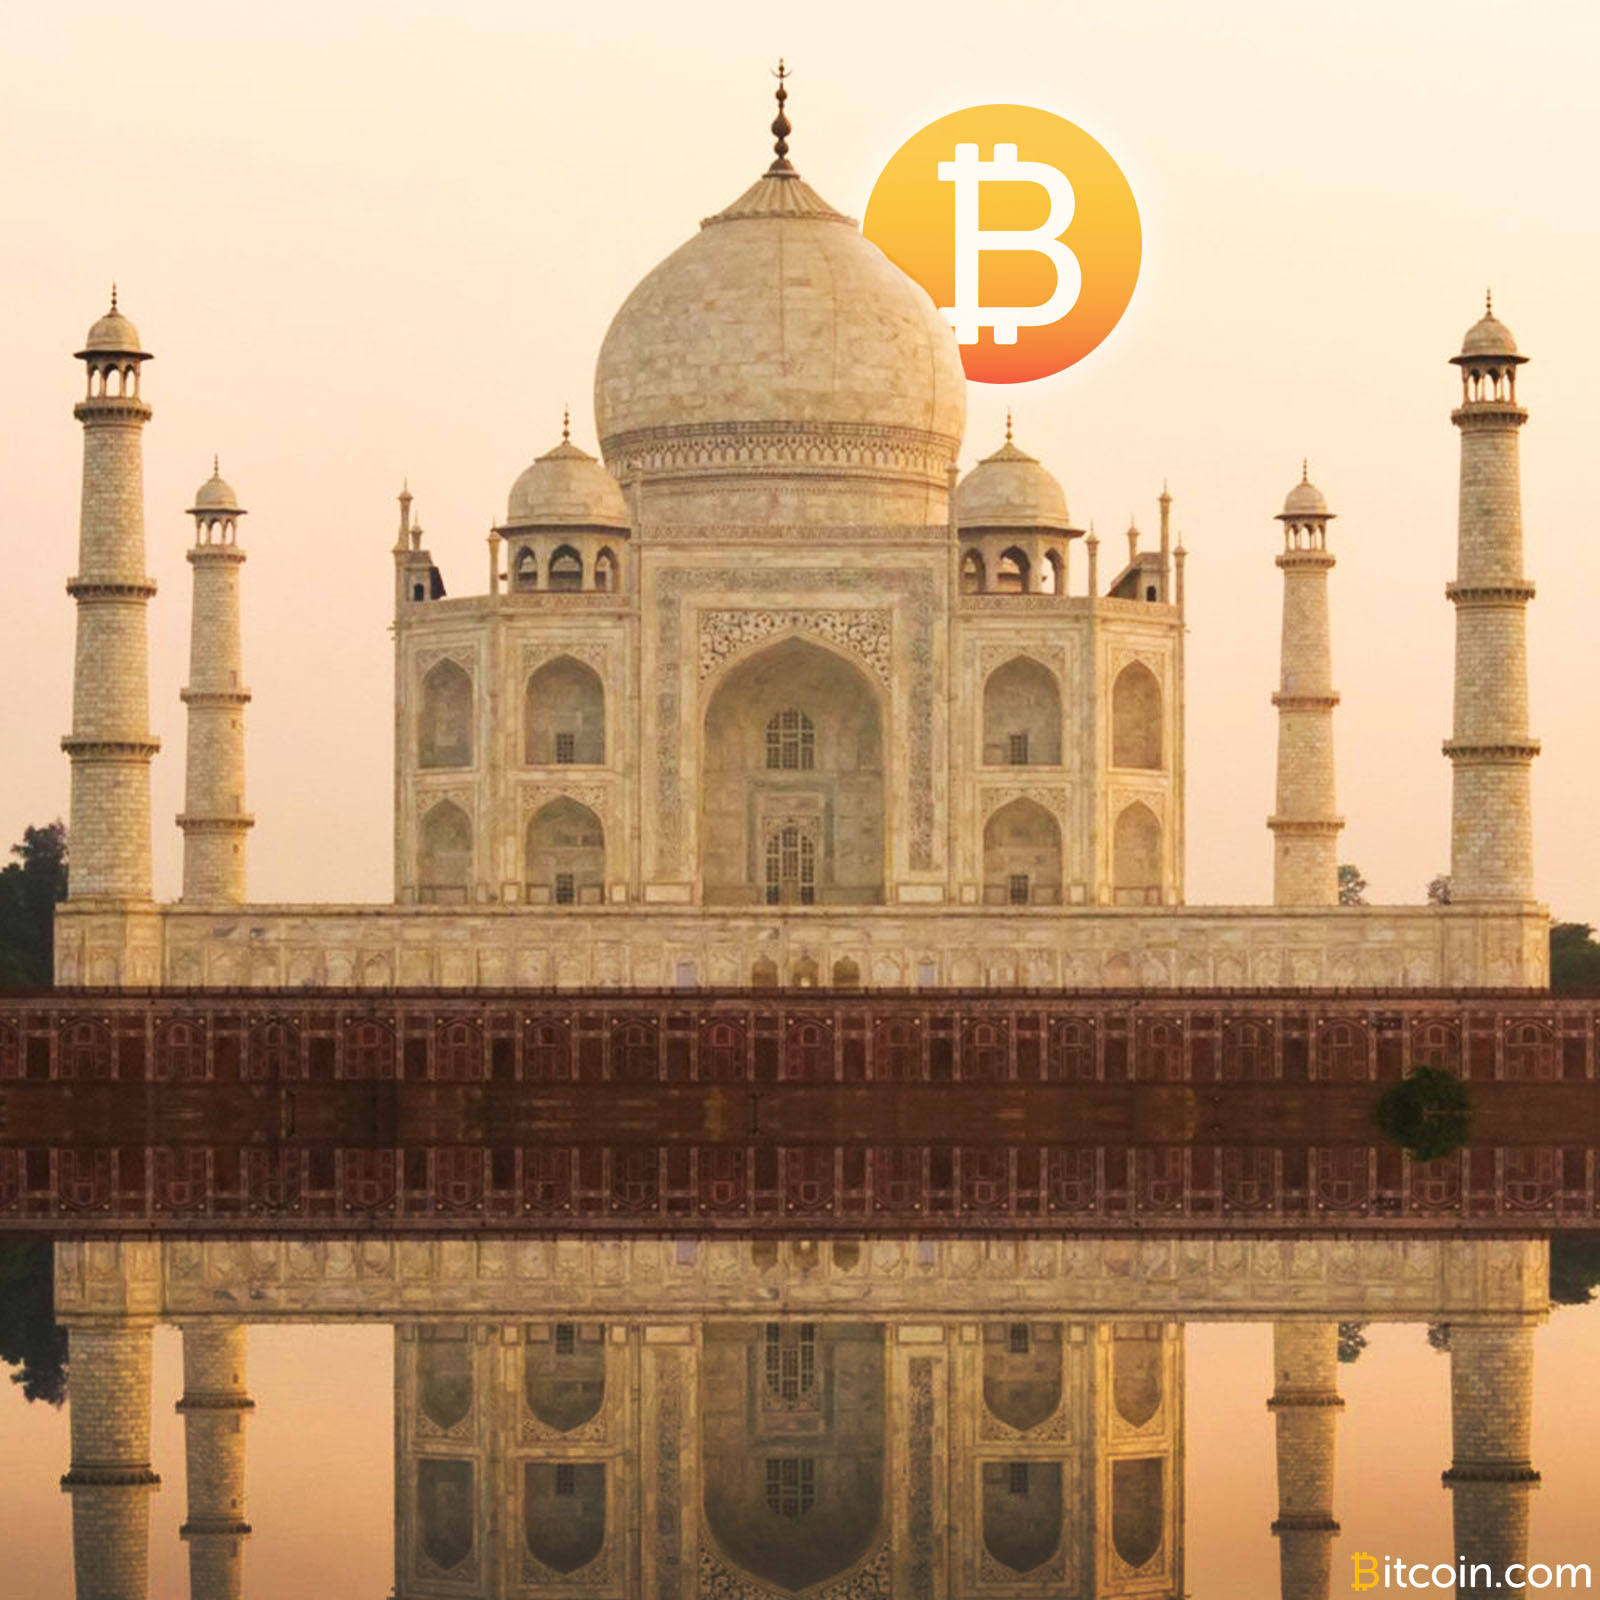 As India's Government Wars Against Cash, Bitcoin is Sought in Exchange